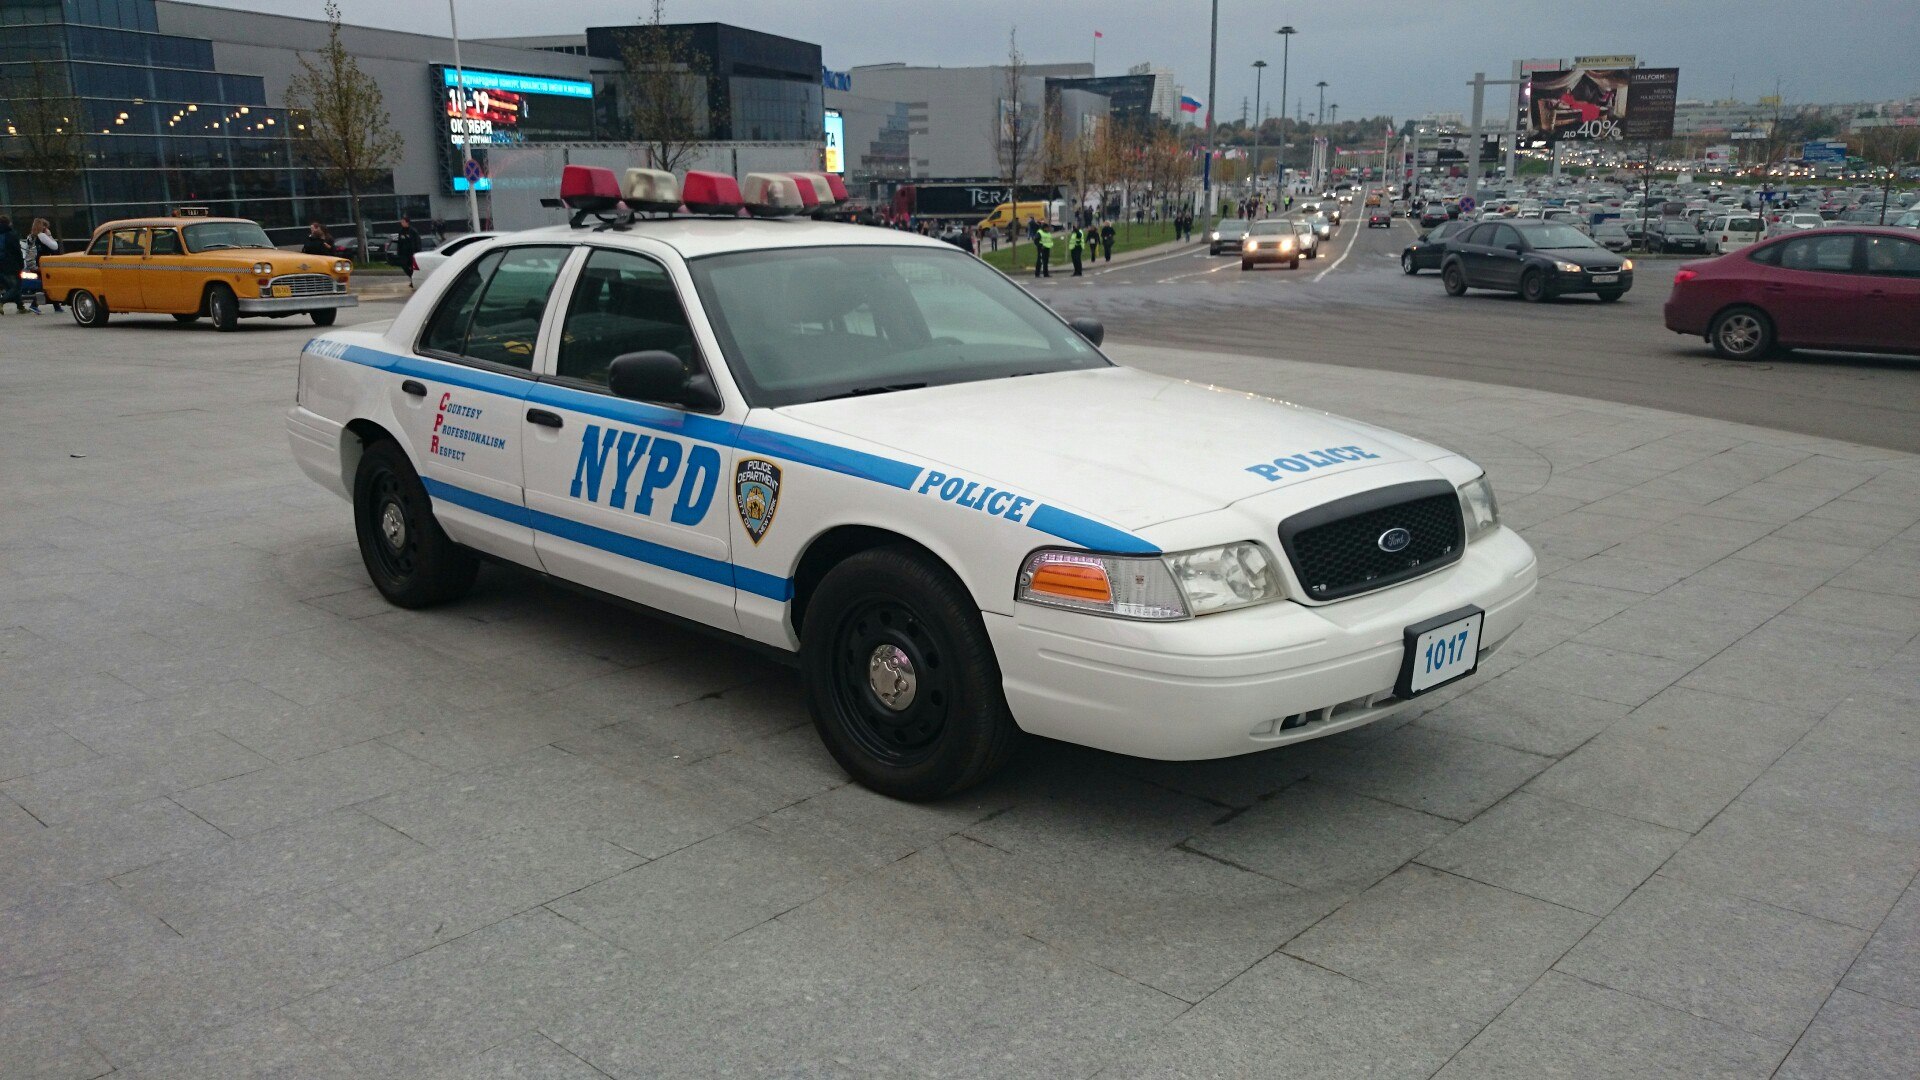 NYPD in Moscow